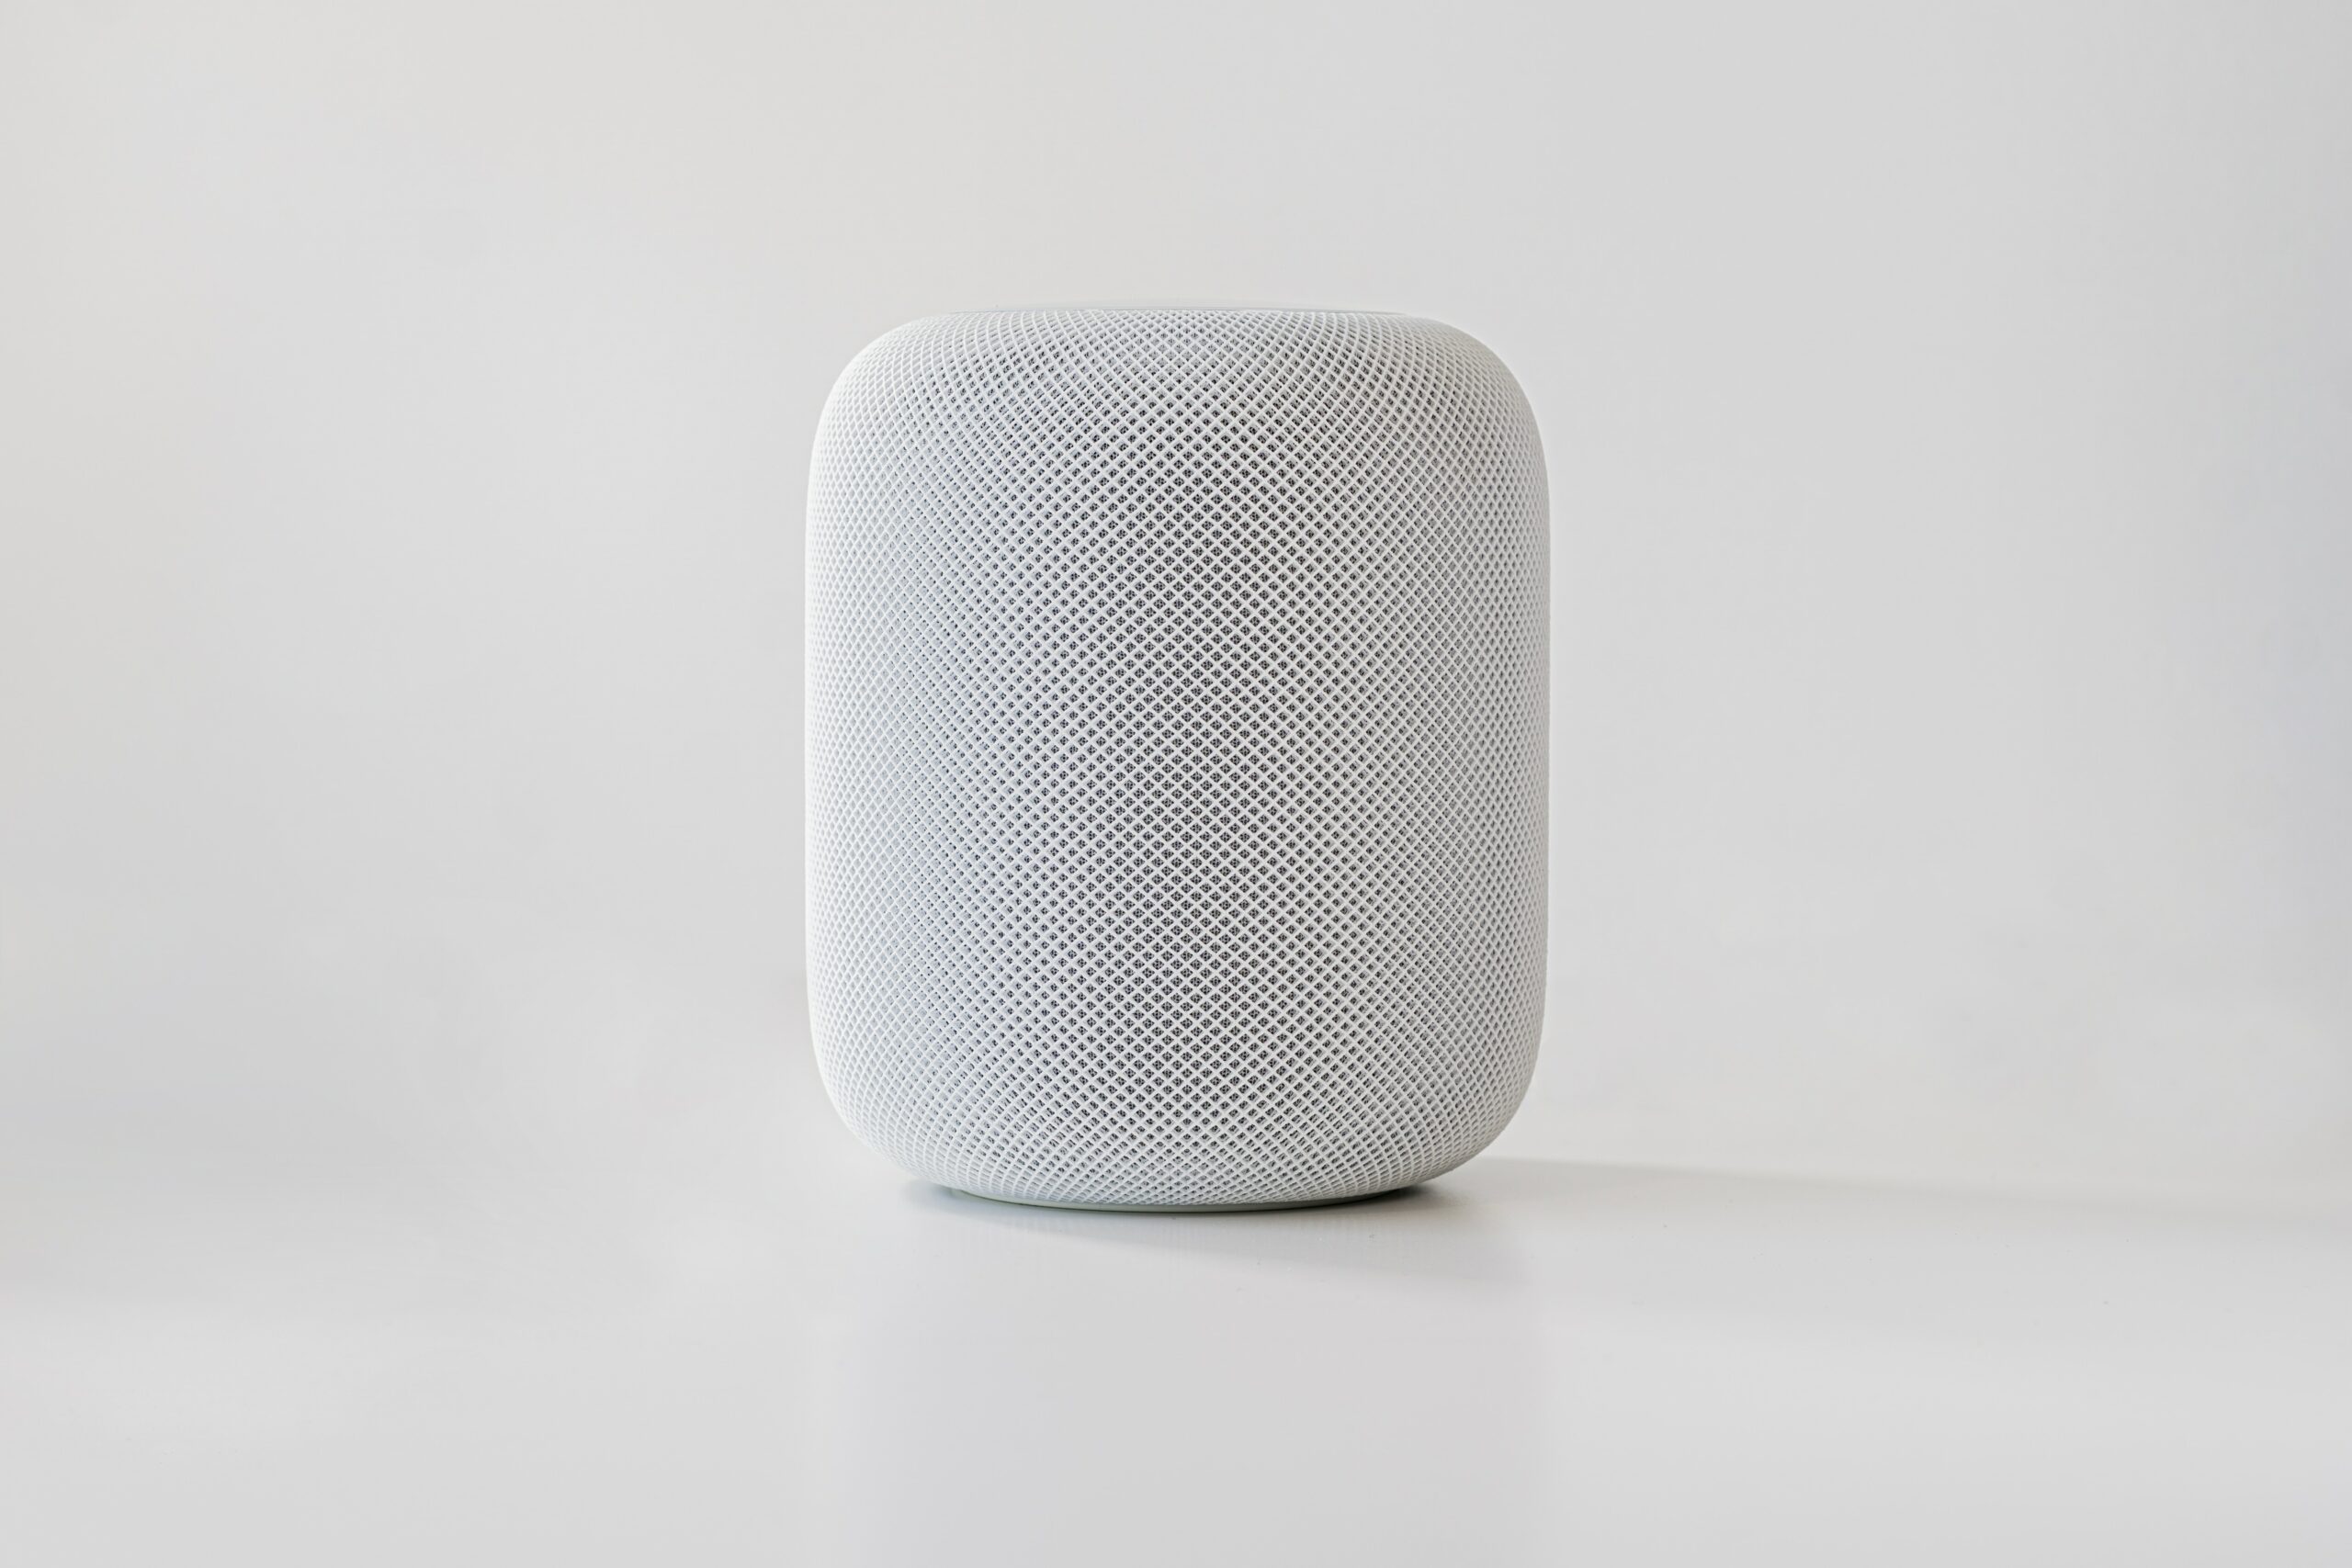 How to Add Notes with HomePod